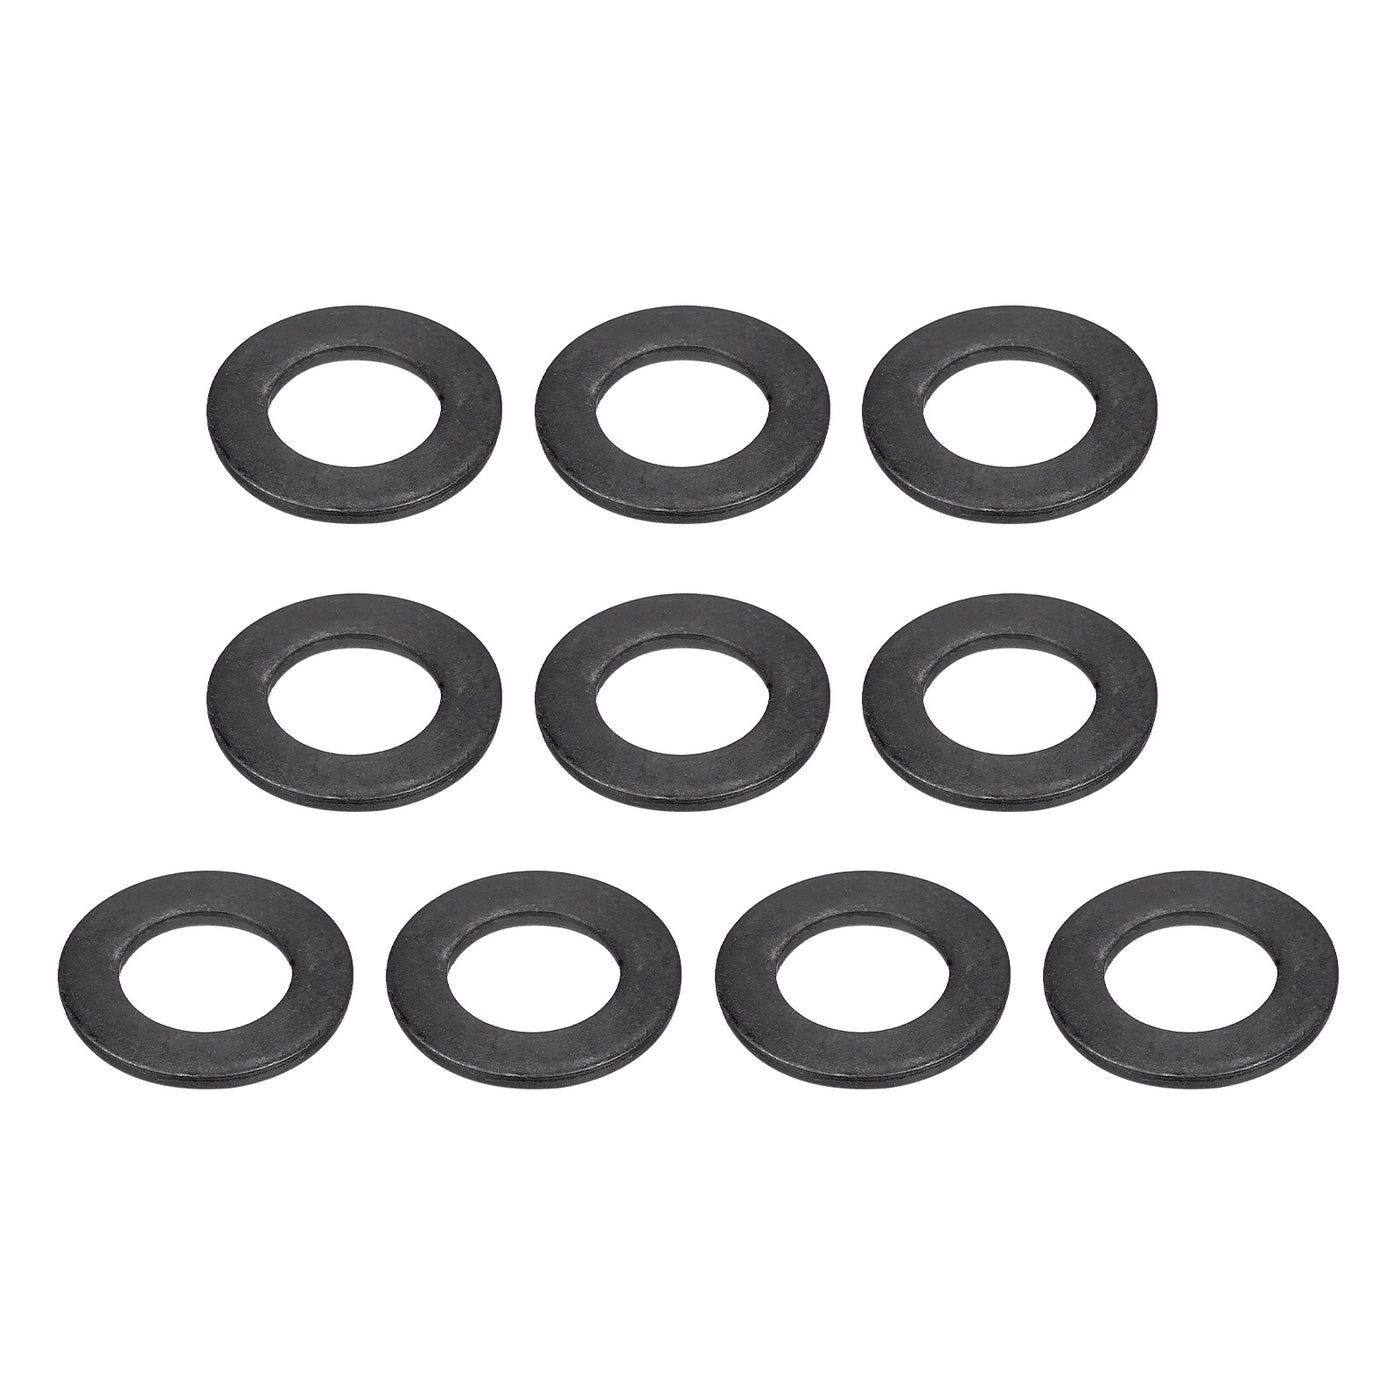 uxcell Uxcell M16 Carbon Steel Flat Washer 25pcs 17x29.5x2.8mm Grade 8.8 Alloy Steel Fasteners